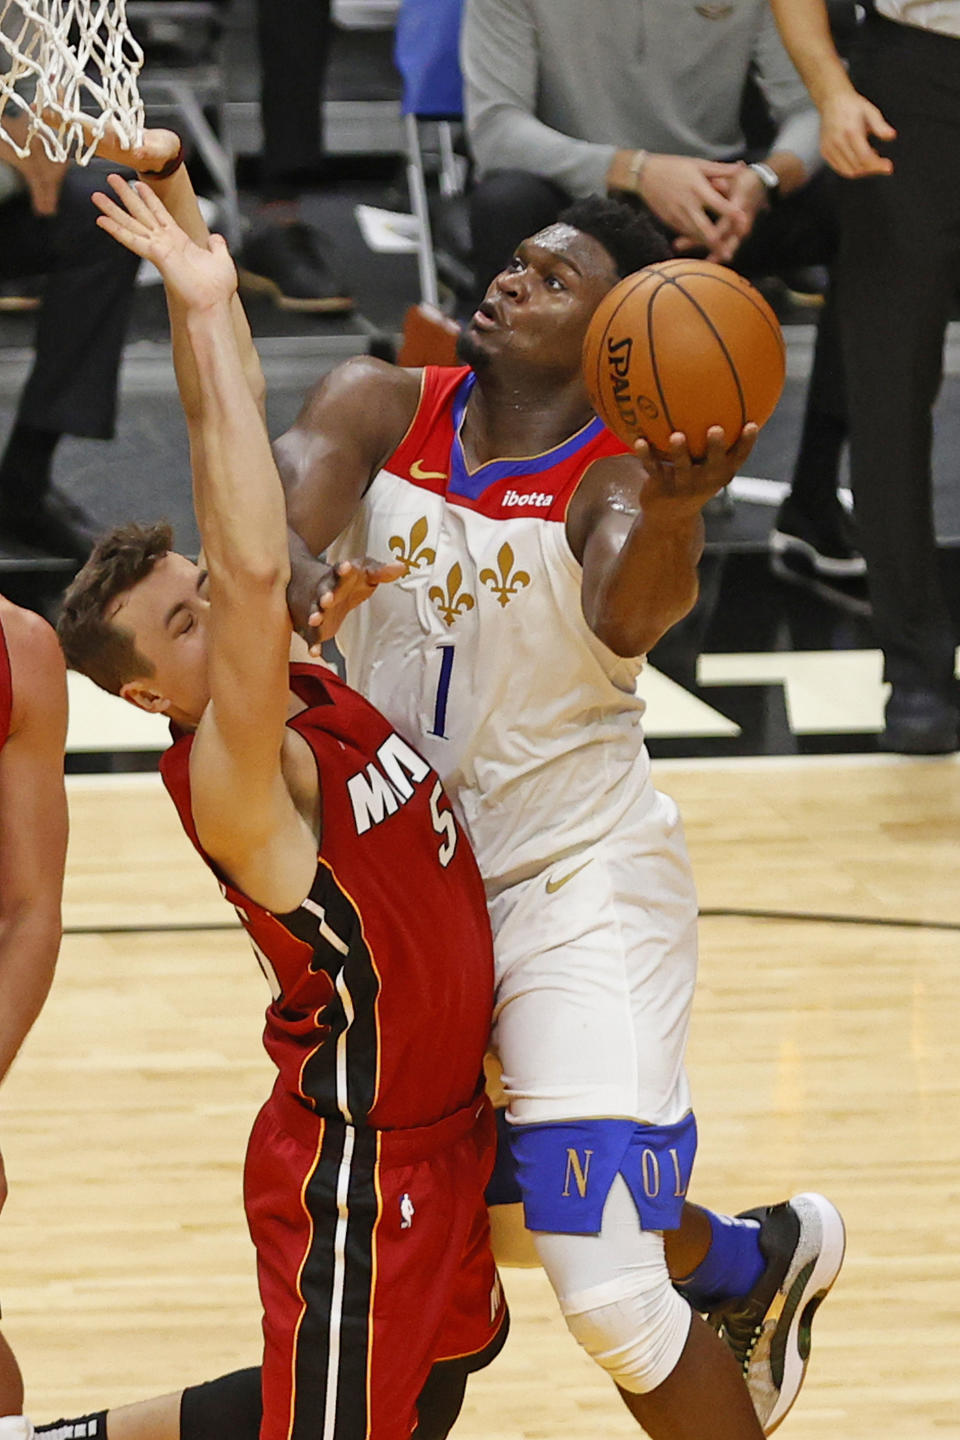 New Orleans Pelicans forward Zion Williamson (1) drives to the basket against Miami Heat forward Duncan Robinson (55) during the first half of an NBA basketball game, Friday, Dec. 25, 2020, in Miami. (AP Photo/Joel Auerbach)